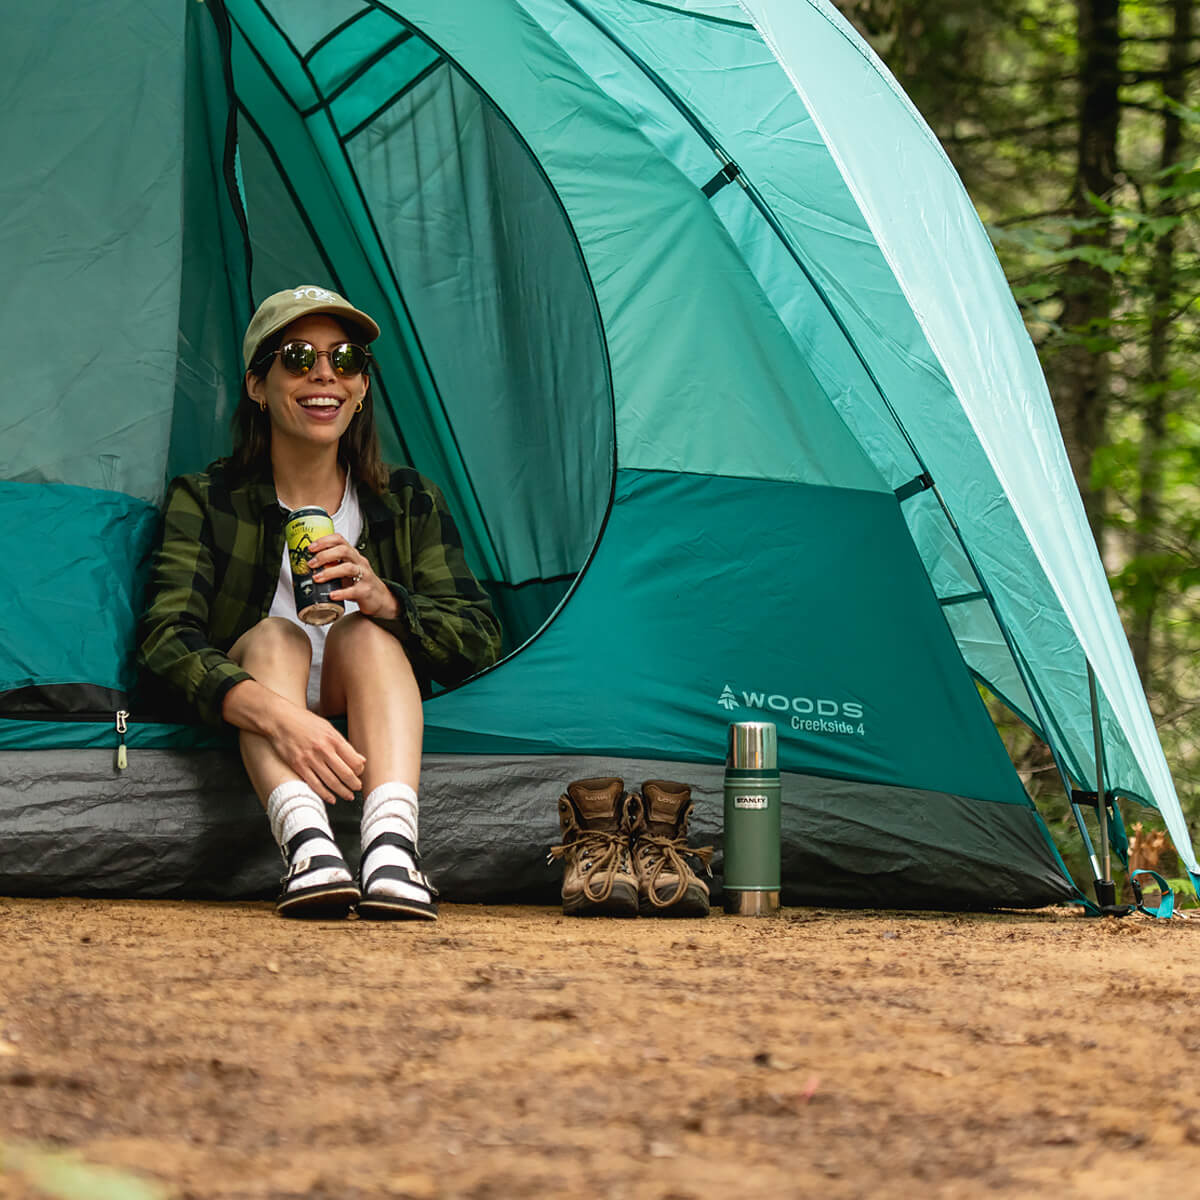 A smiling woman, taking a break on the edge of her camping tent, on one of the sites surrounded by nature and forest at La Vallée.